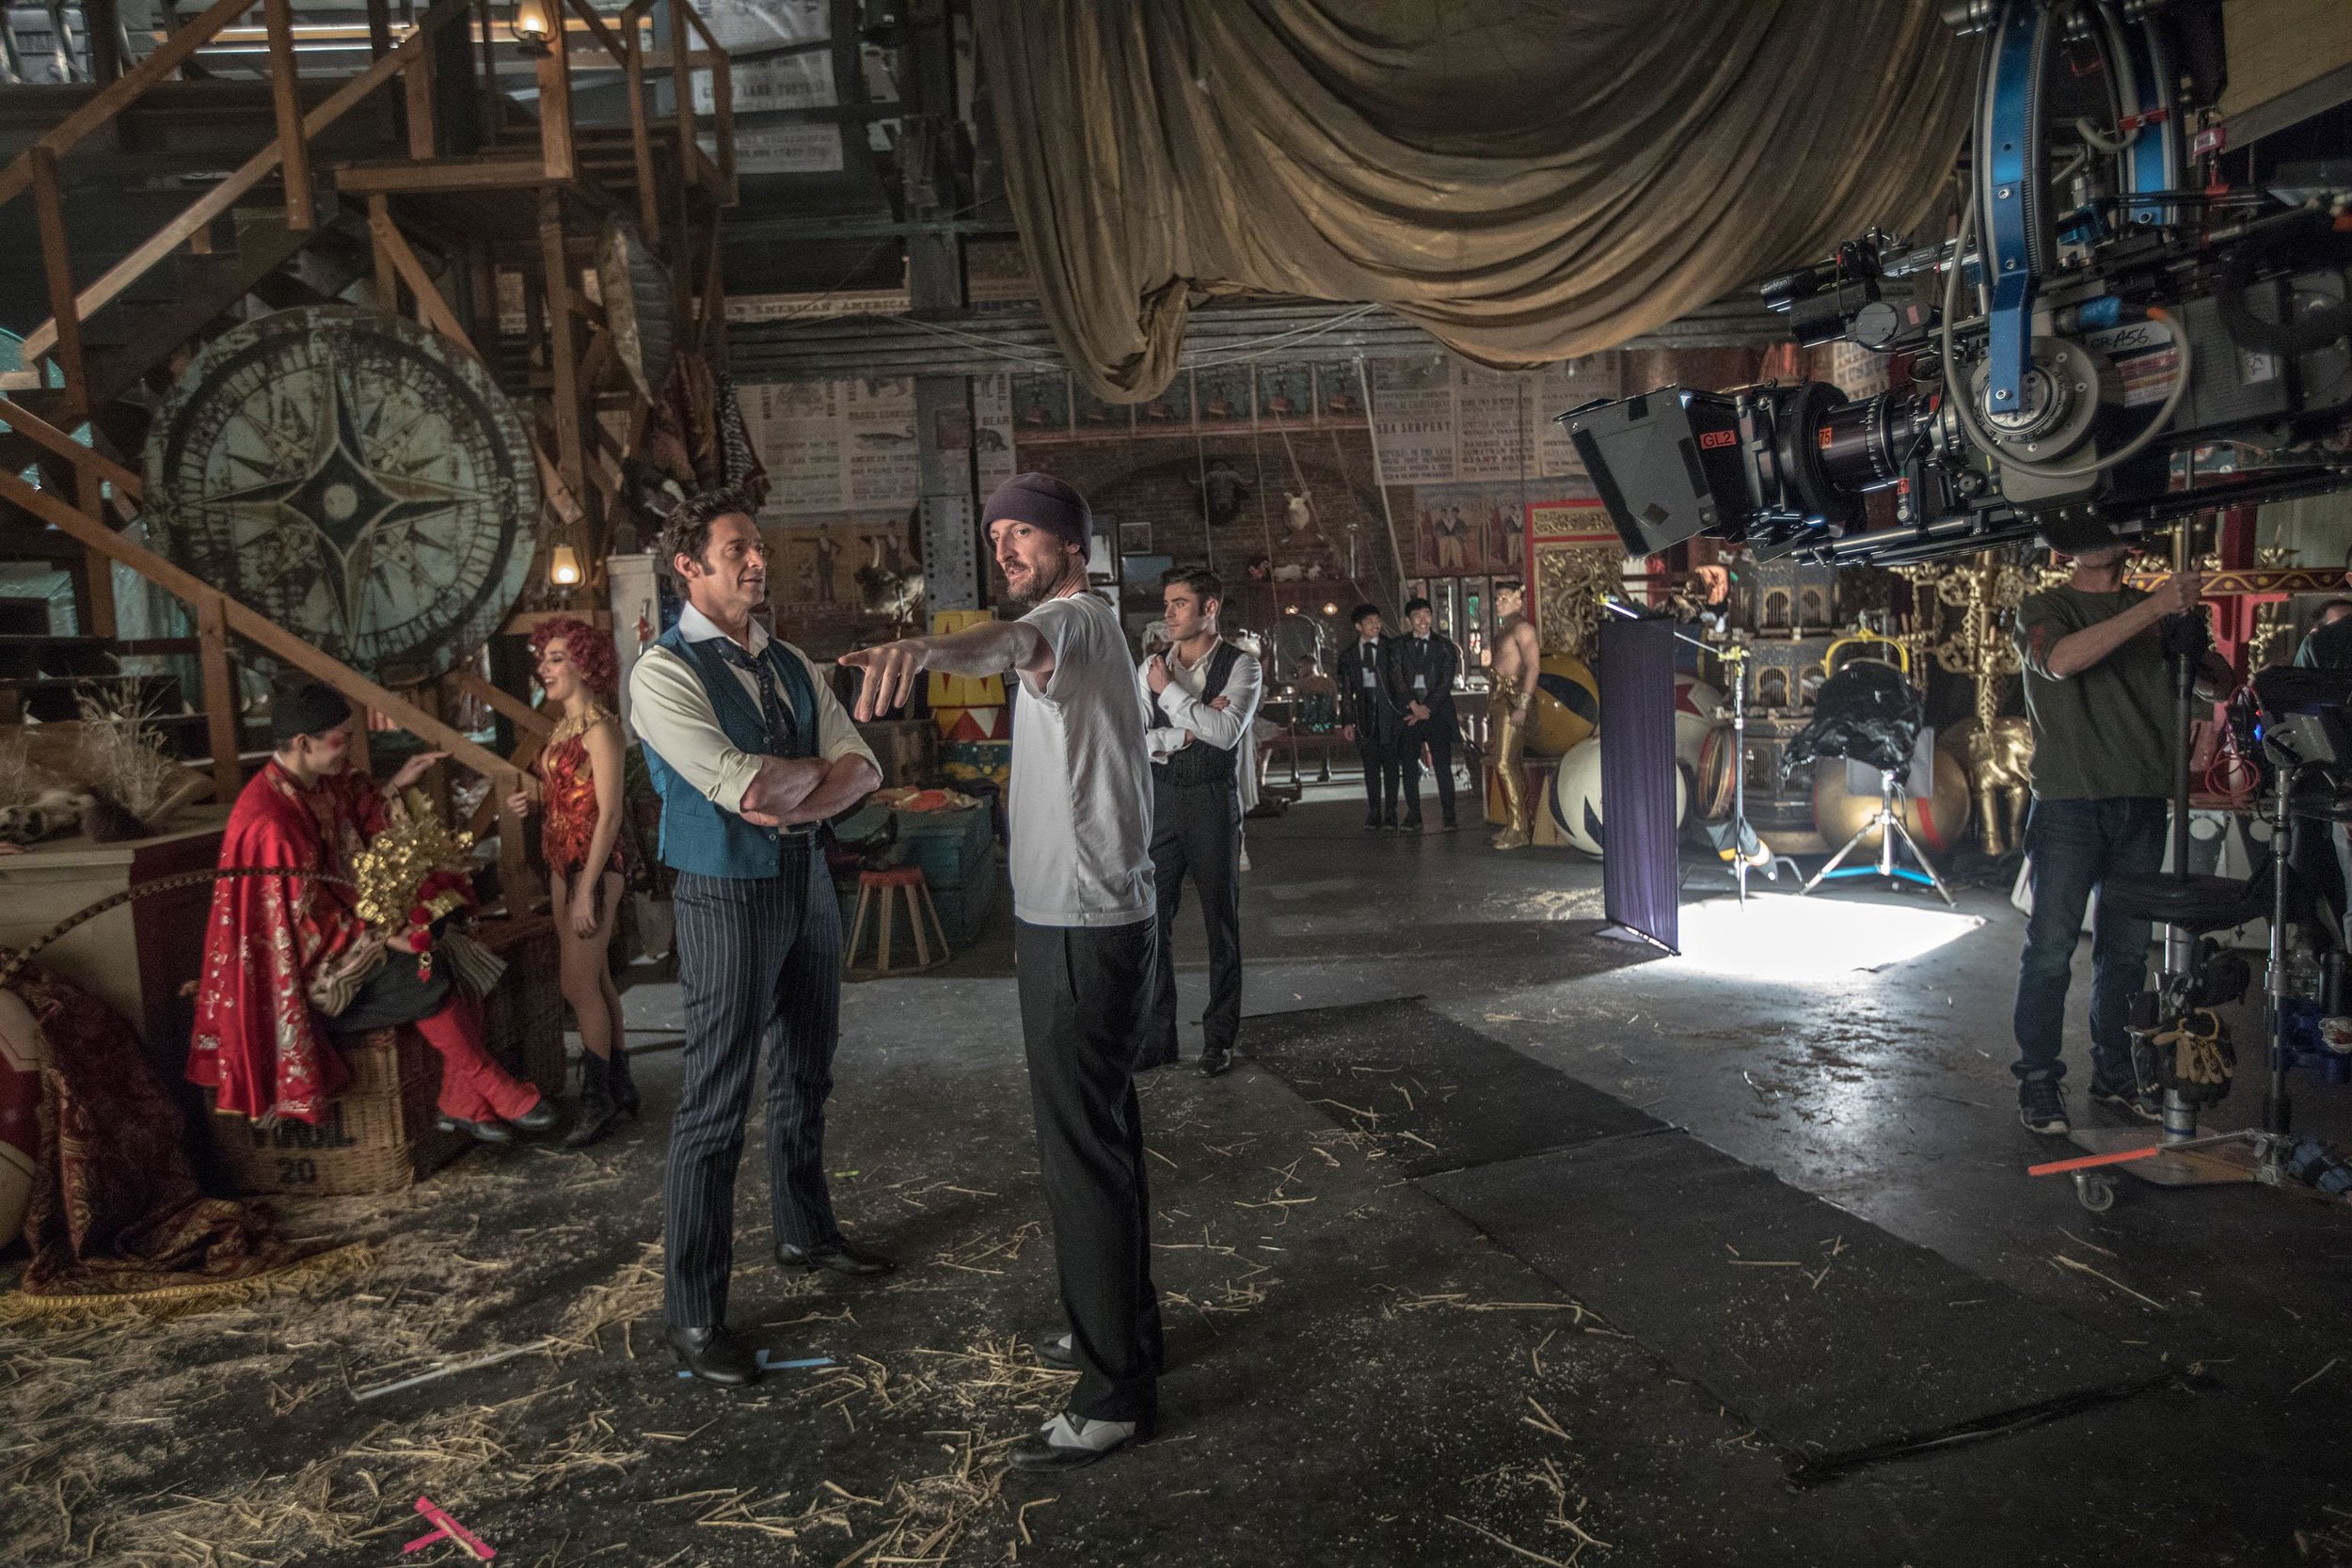 hugh-jackman-and-michael-gracey-in-the-greatest-showman-2017-large-picture.jpg